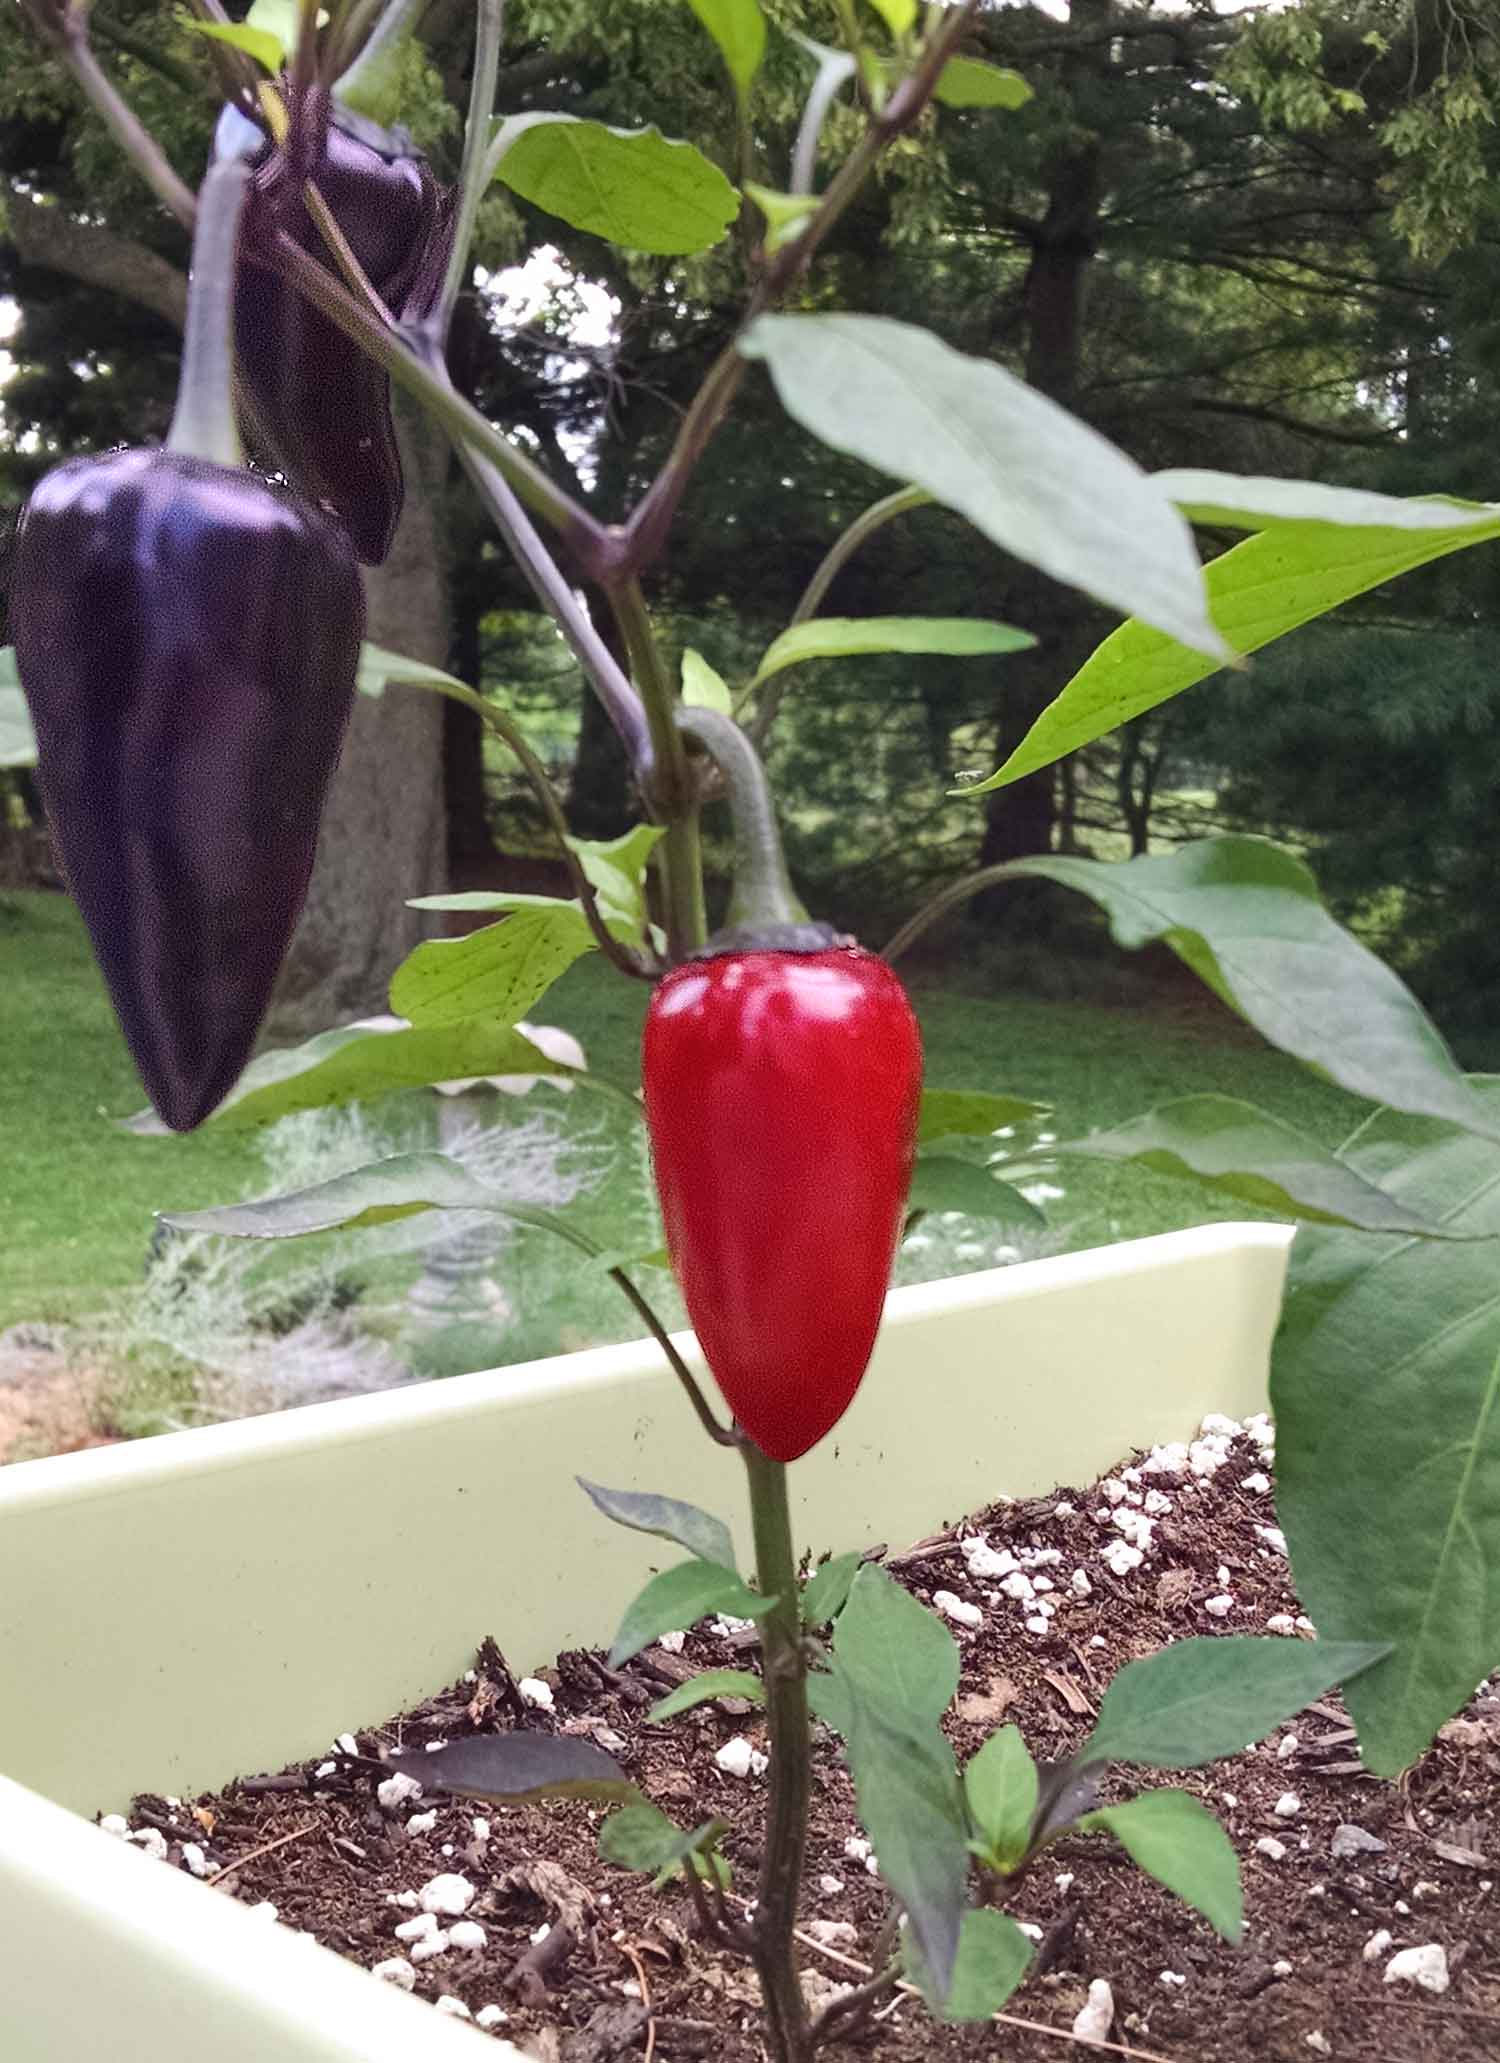 Purple jalapeno pepper plant with two purple jalapenos and one red jalapeno.